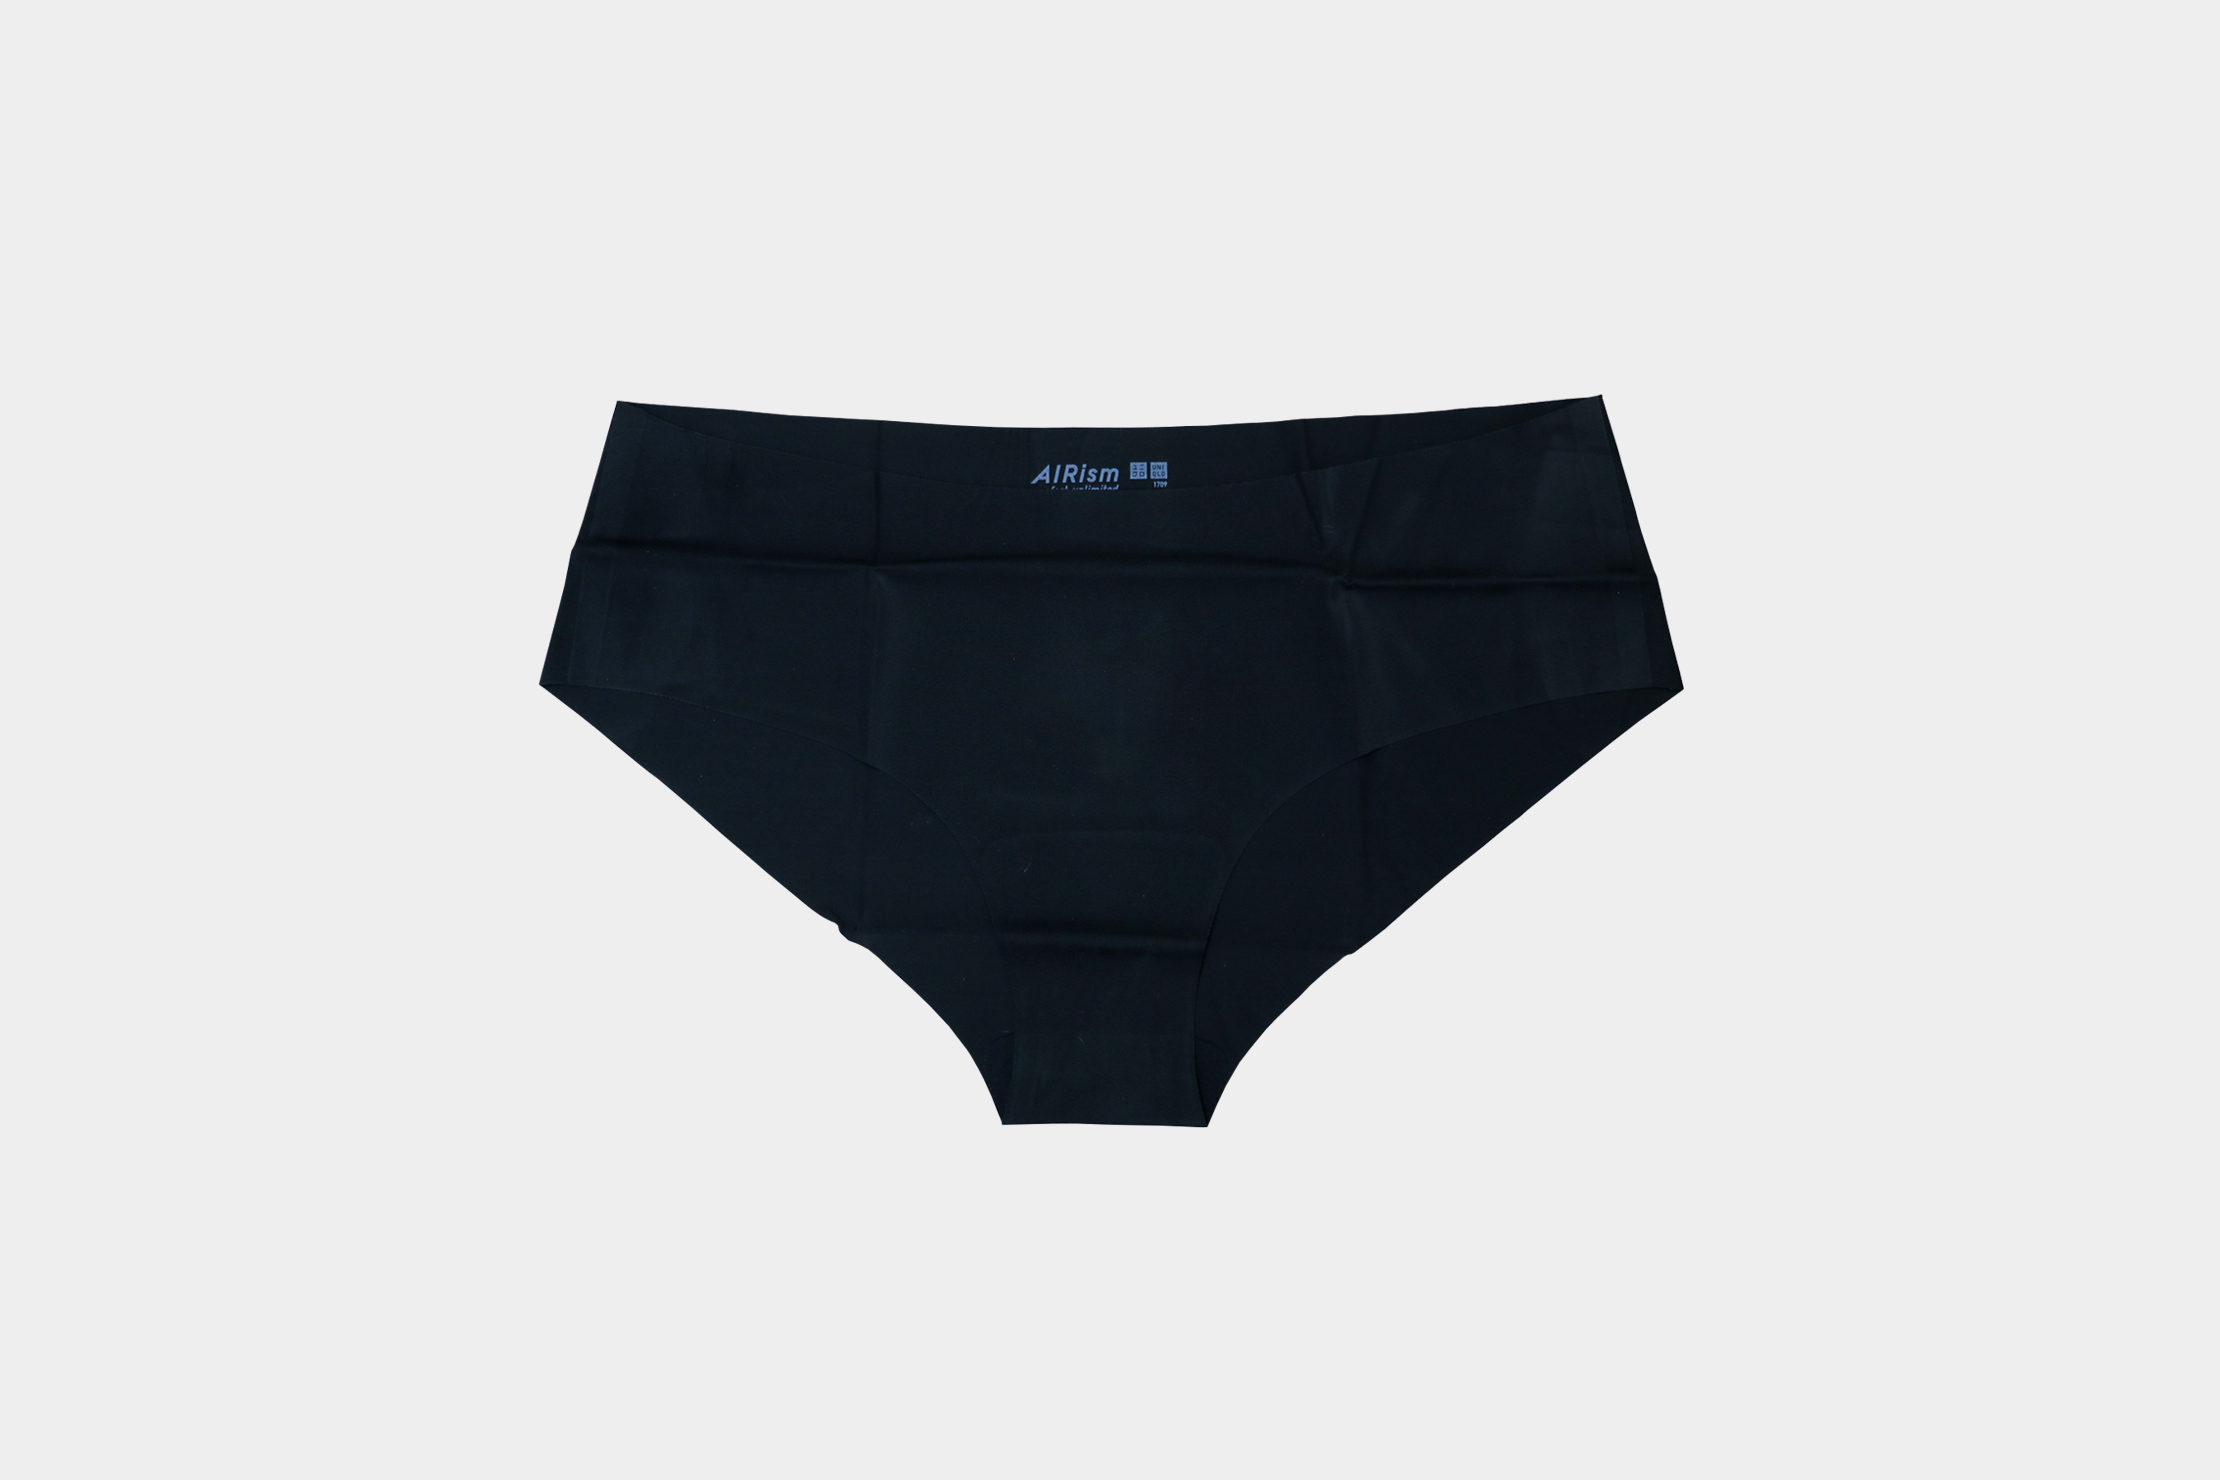 Uniqlo AIRism Ultra Seamless High Rise Brief (Panty) - Black, Women's  Fashion, Maternity wear on Carousell